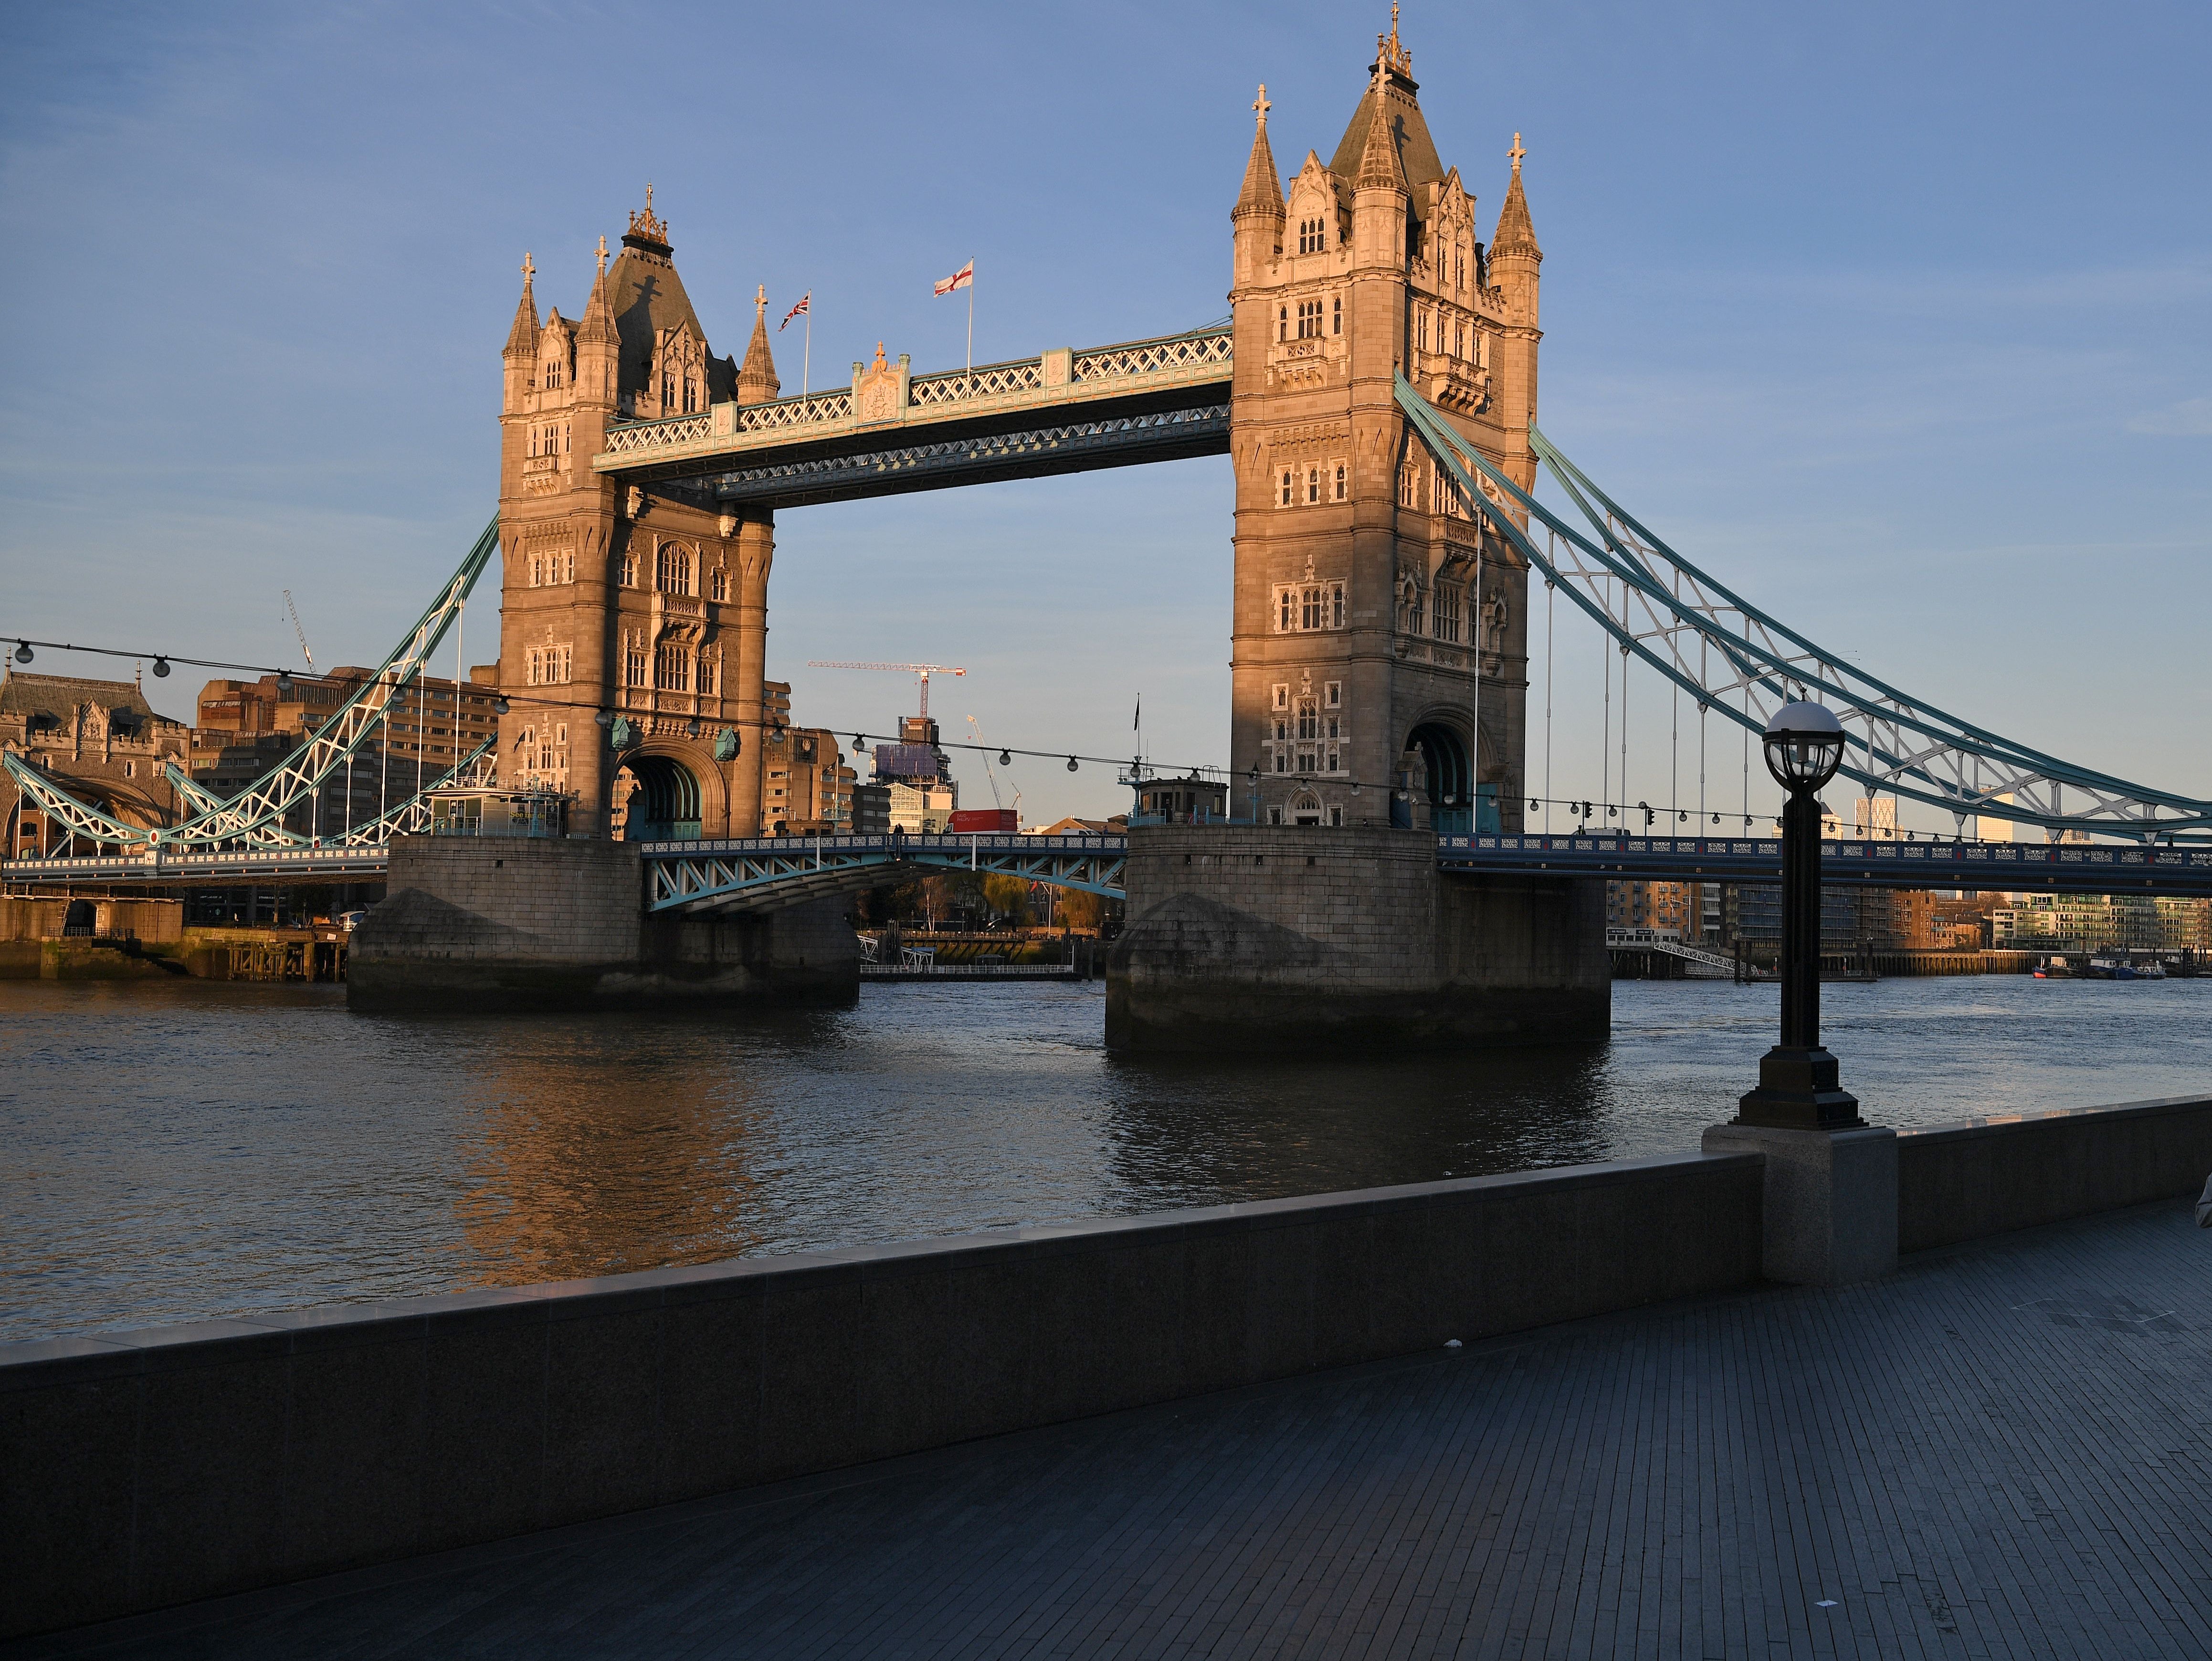 Police are investigating what happened after the boy got off the bus near Tower Bridge